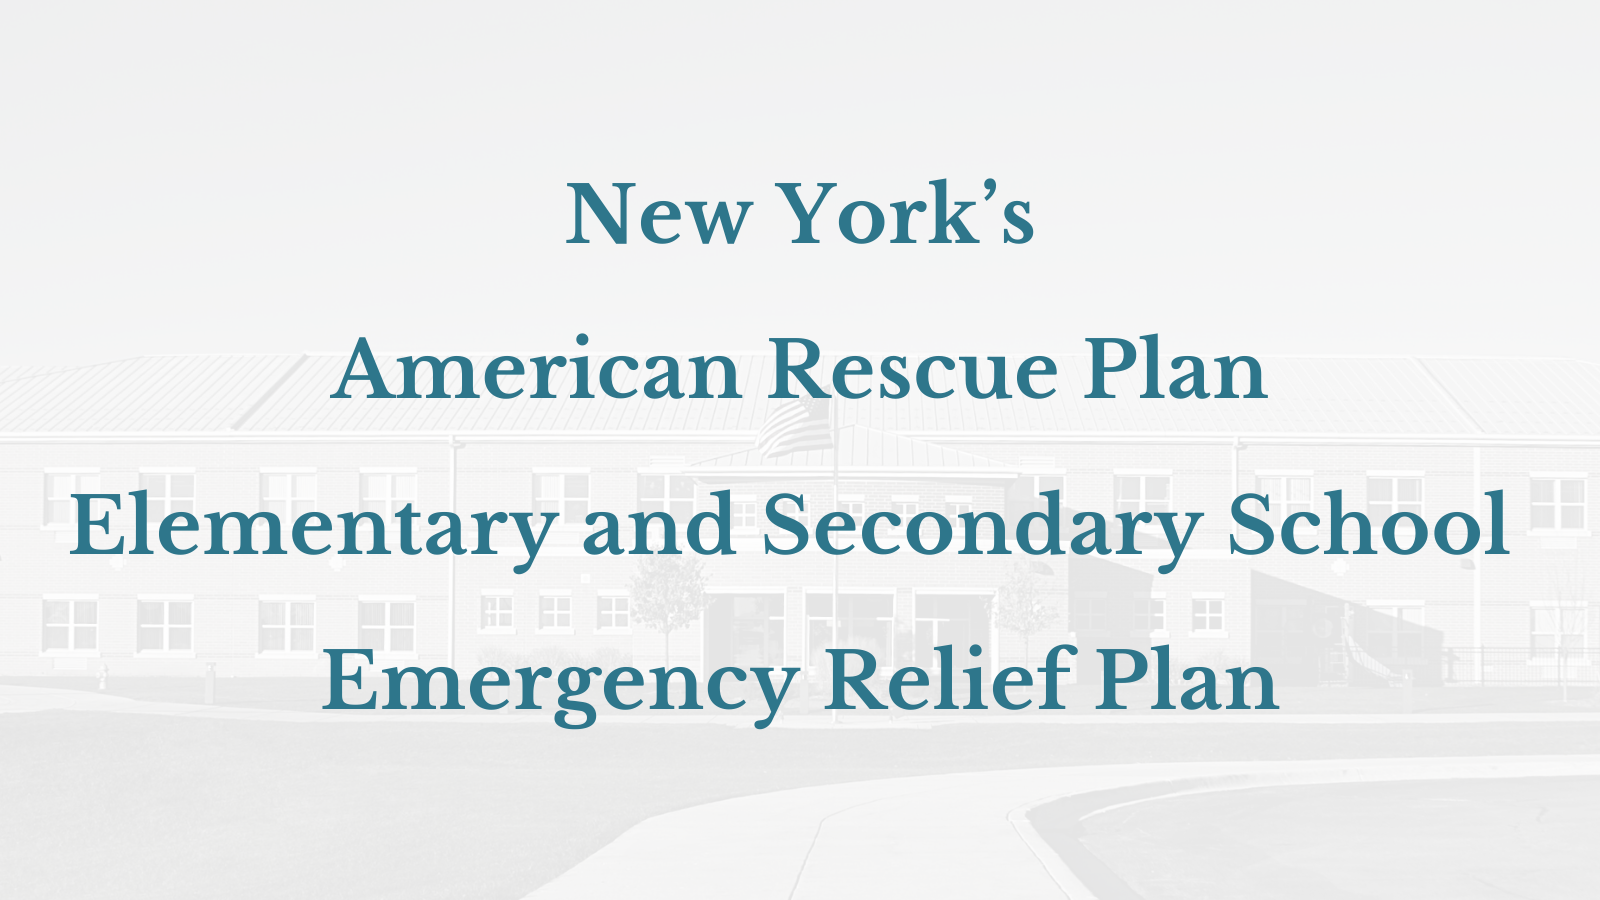 New York’s American Rescue Plan Elementary and Secondary School Emergency Relief Plan